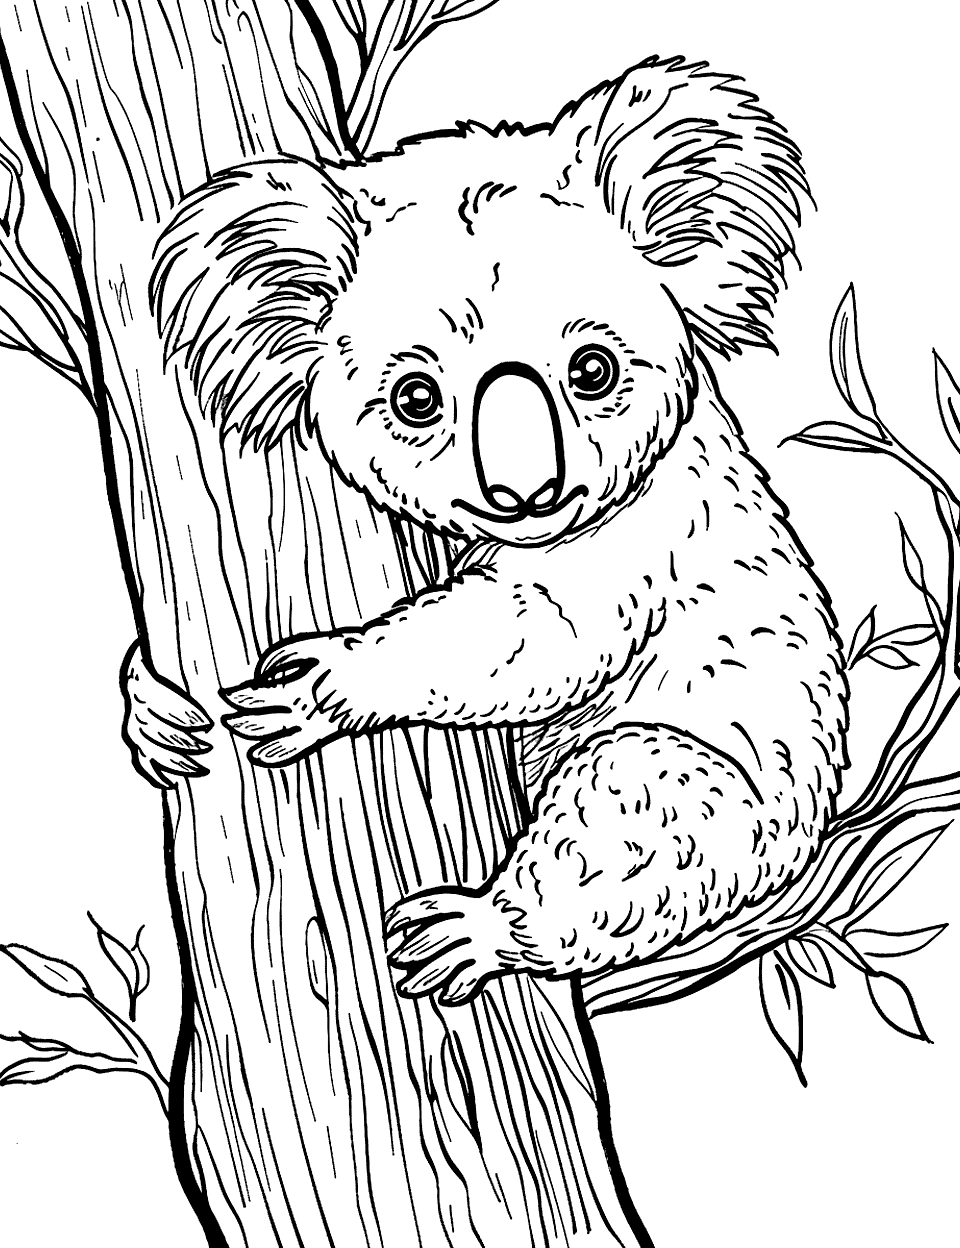 Small Koala in a Large Tree Coloring Page - A tiny koala looking curiously at its vast surroundings while tightly hugging a tree.